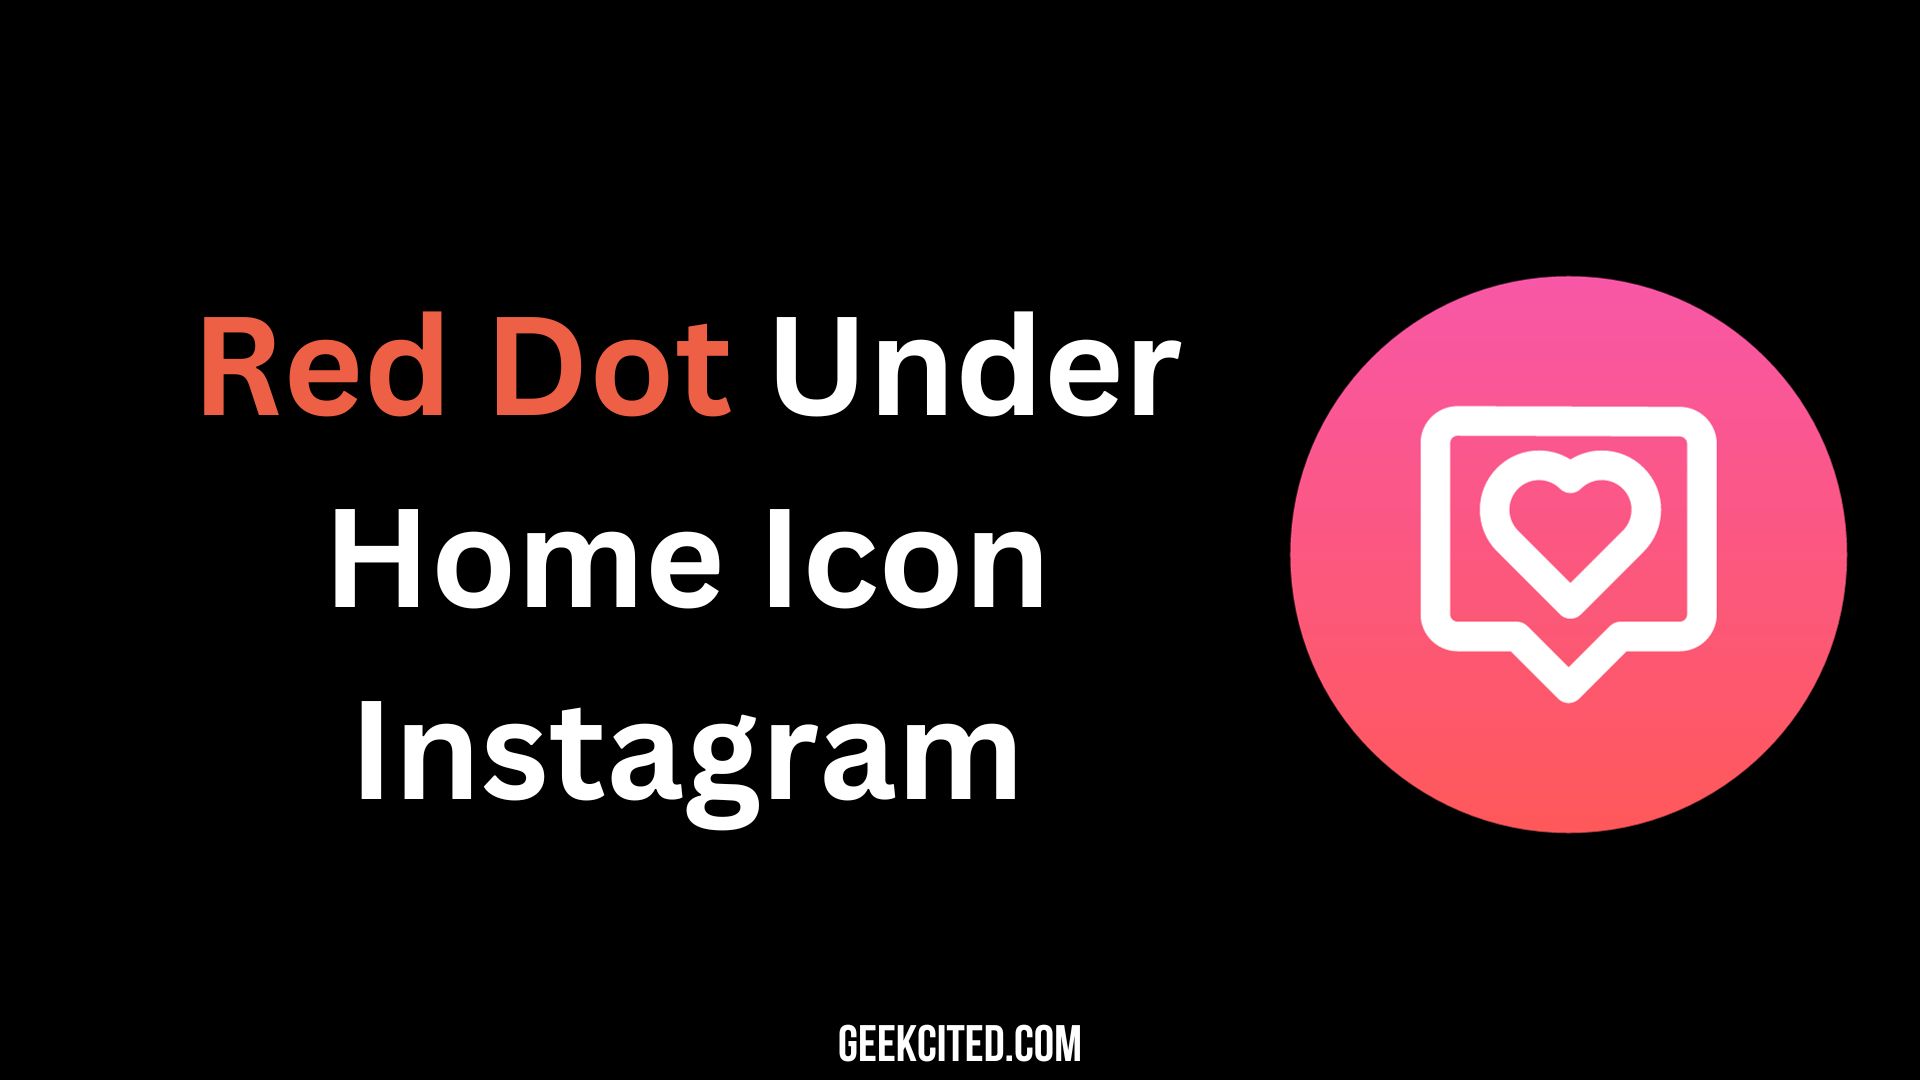 Red Dot Under Home Icon Instagram